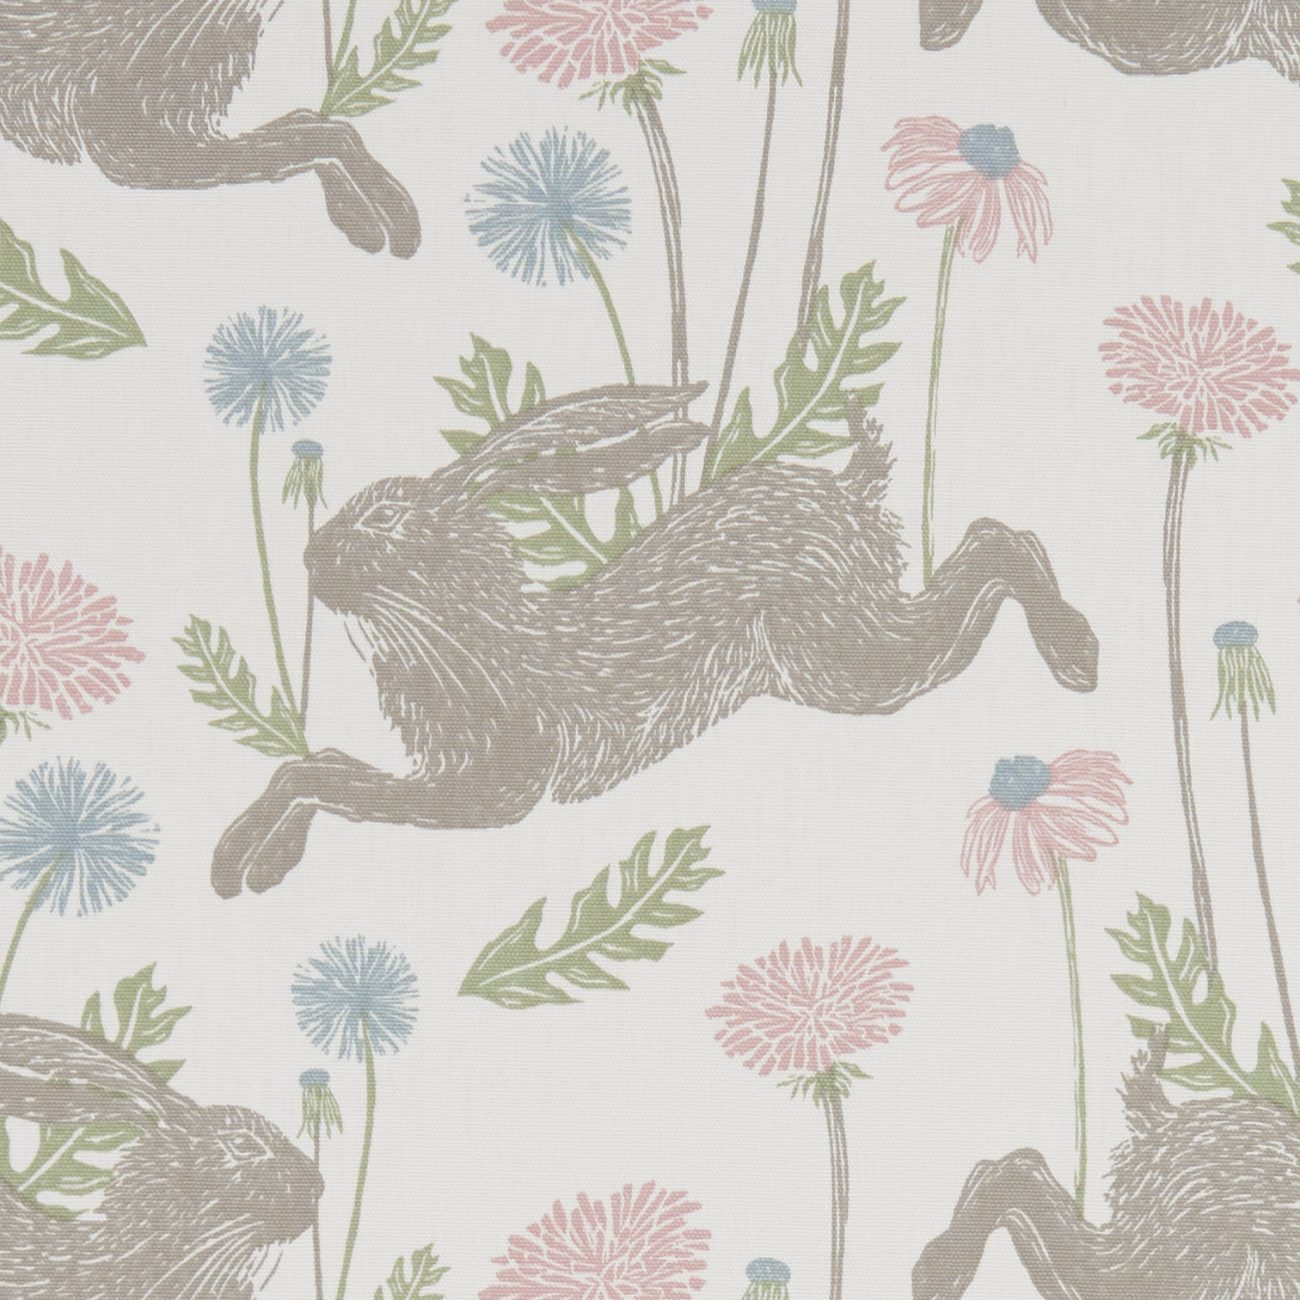 March Hare Pastel Fabric by Studio G